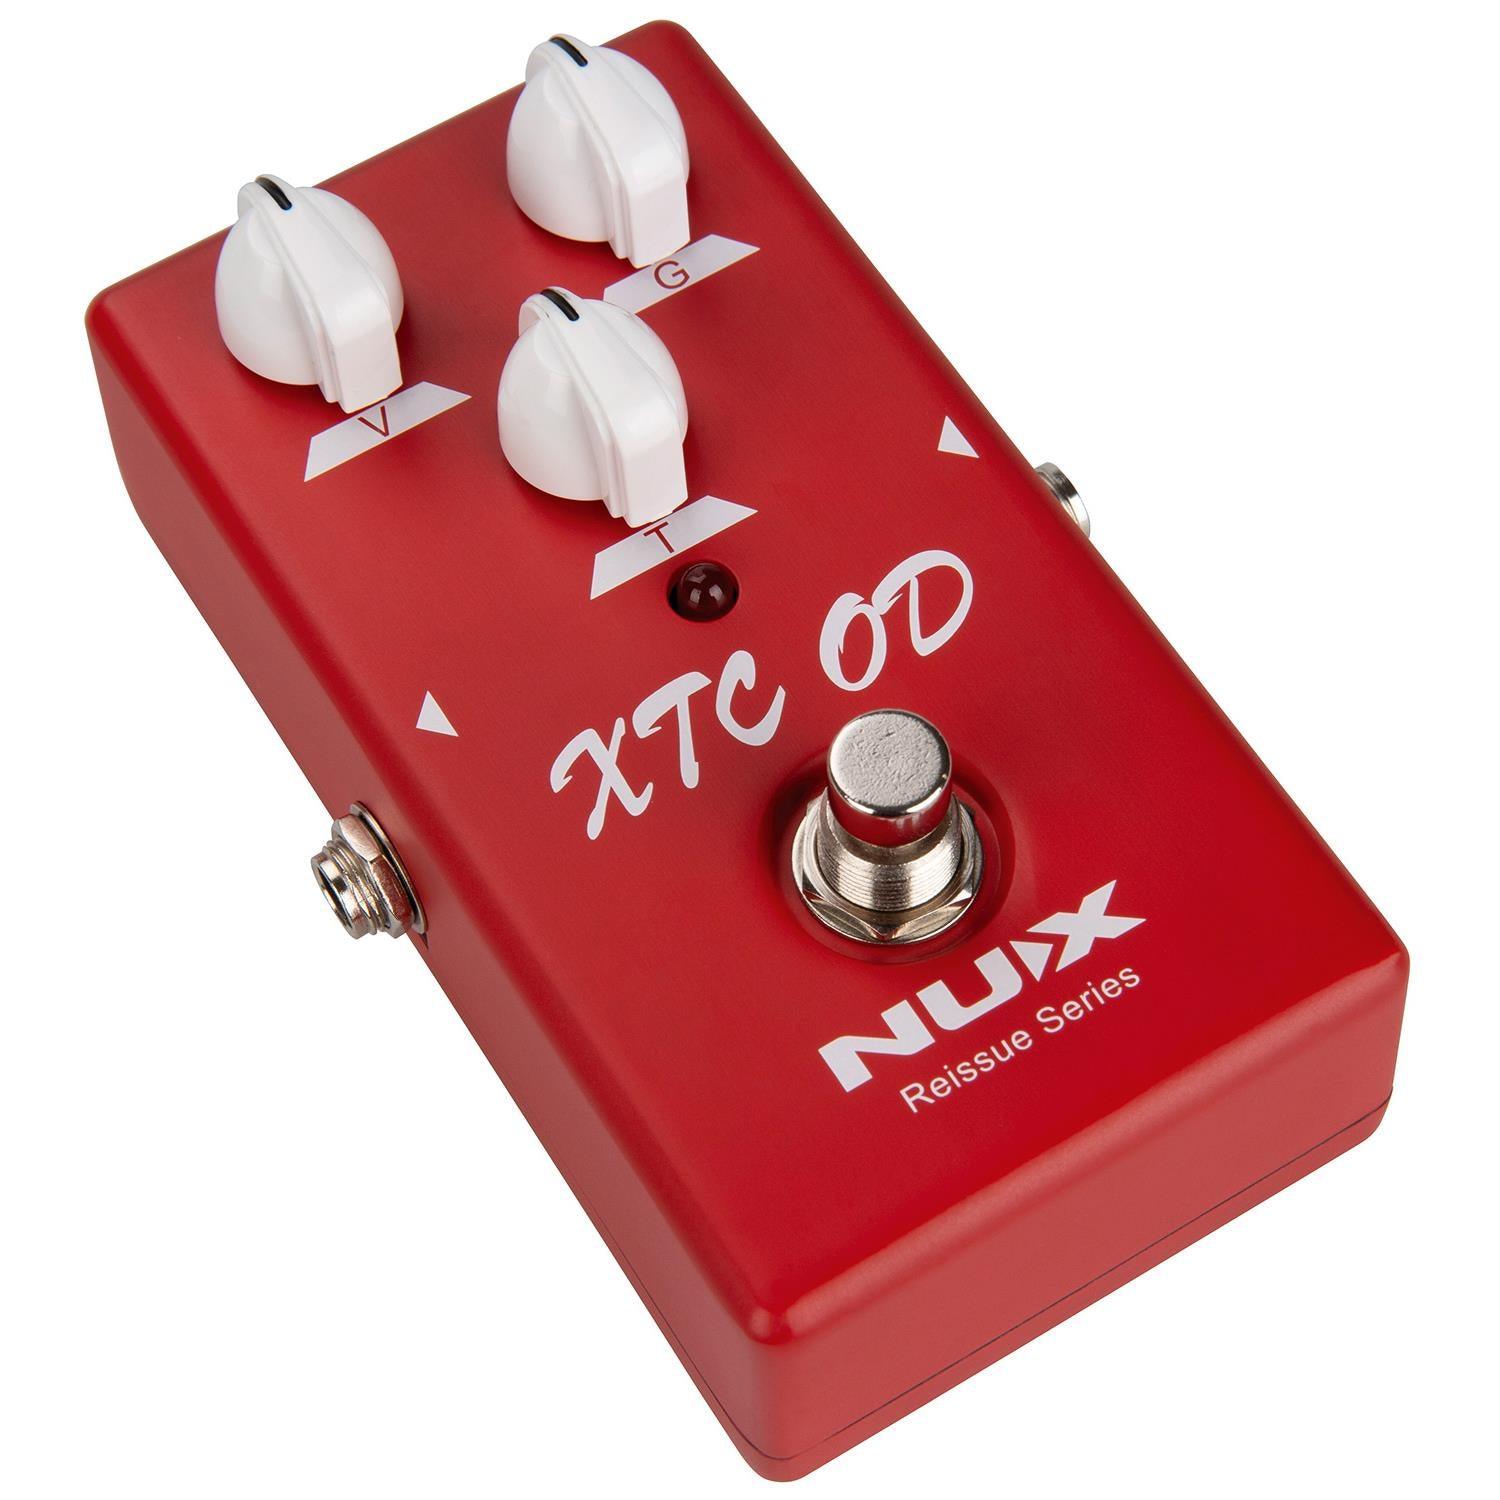 NUX NU-X Reissue XTC Overdrive Pedal - DY Pro Audio